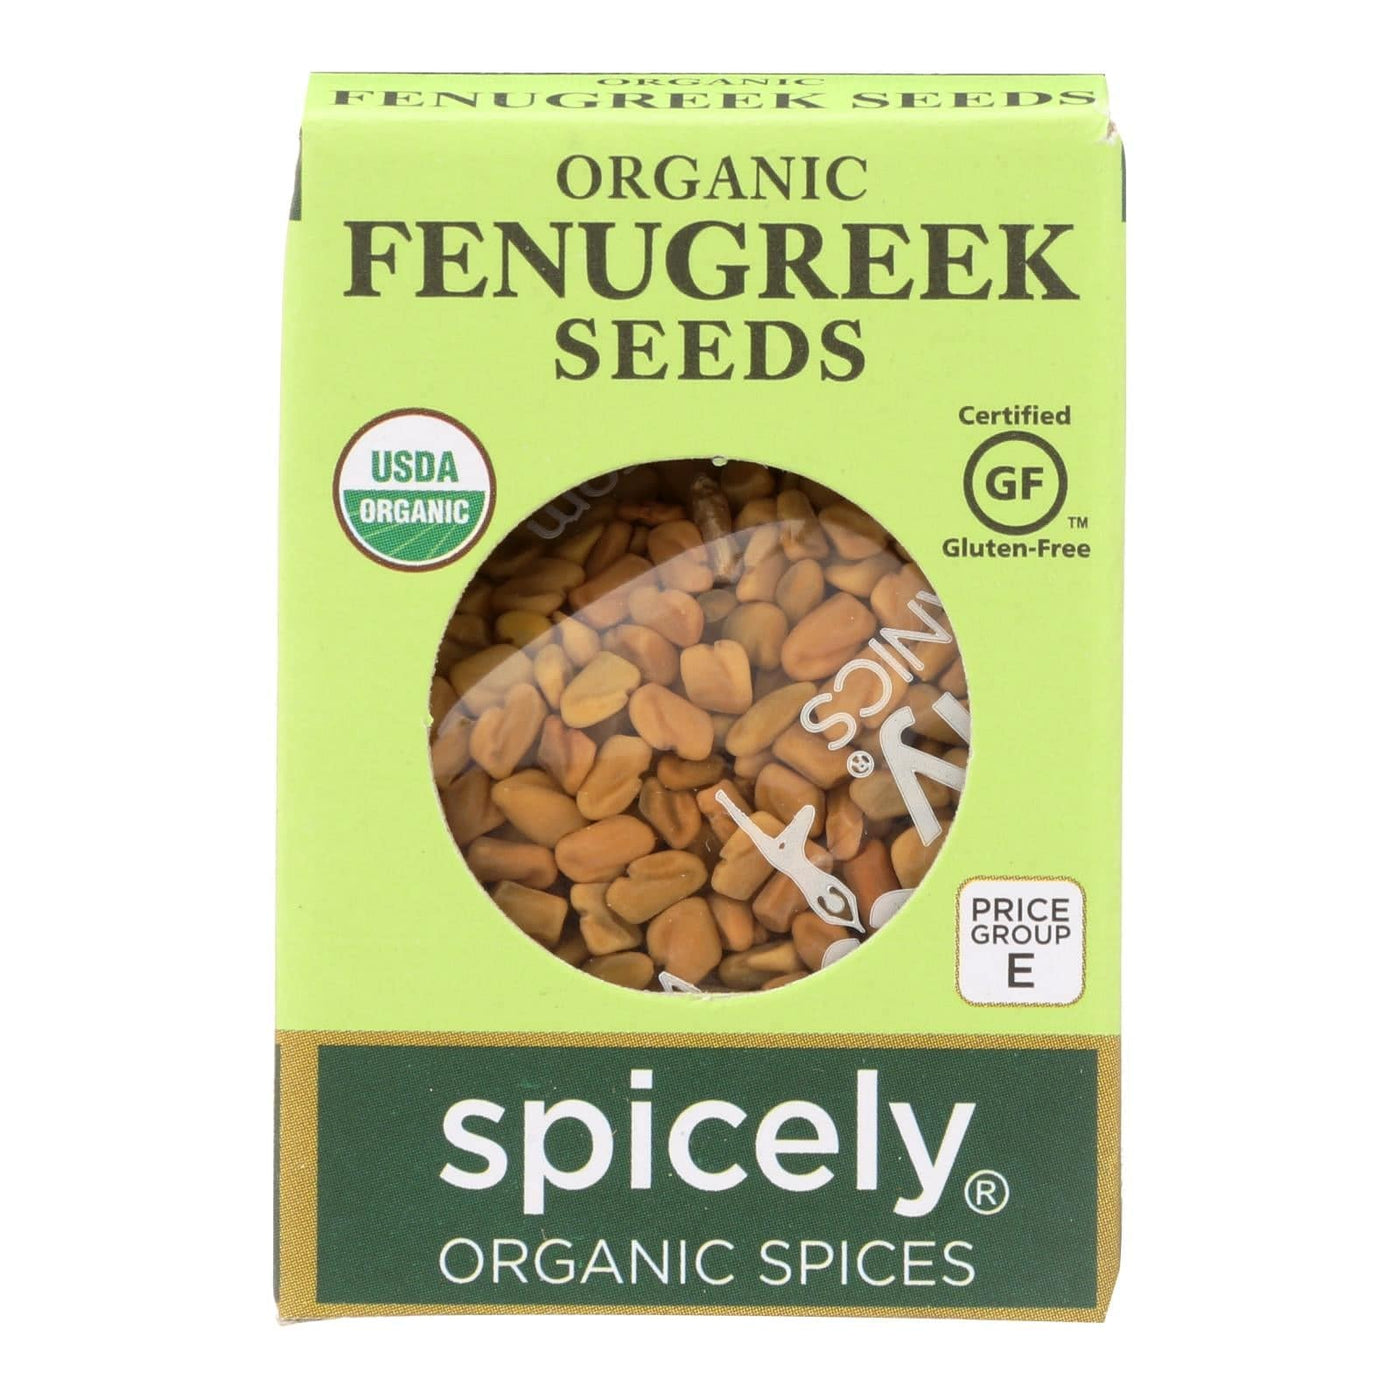 Buy Spicely Organics - Organic Fenugreek Seeds - Case Of 6 - 0.45 Oz.  at OnlyNaturals.us